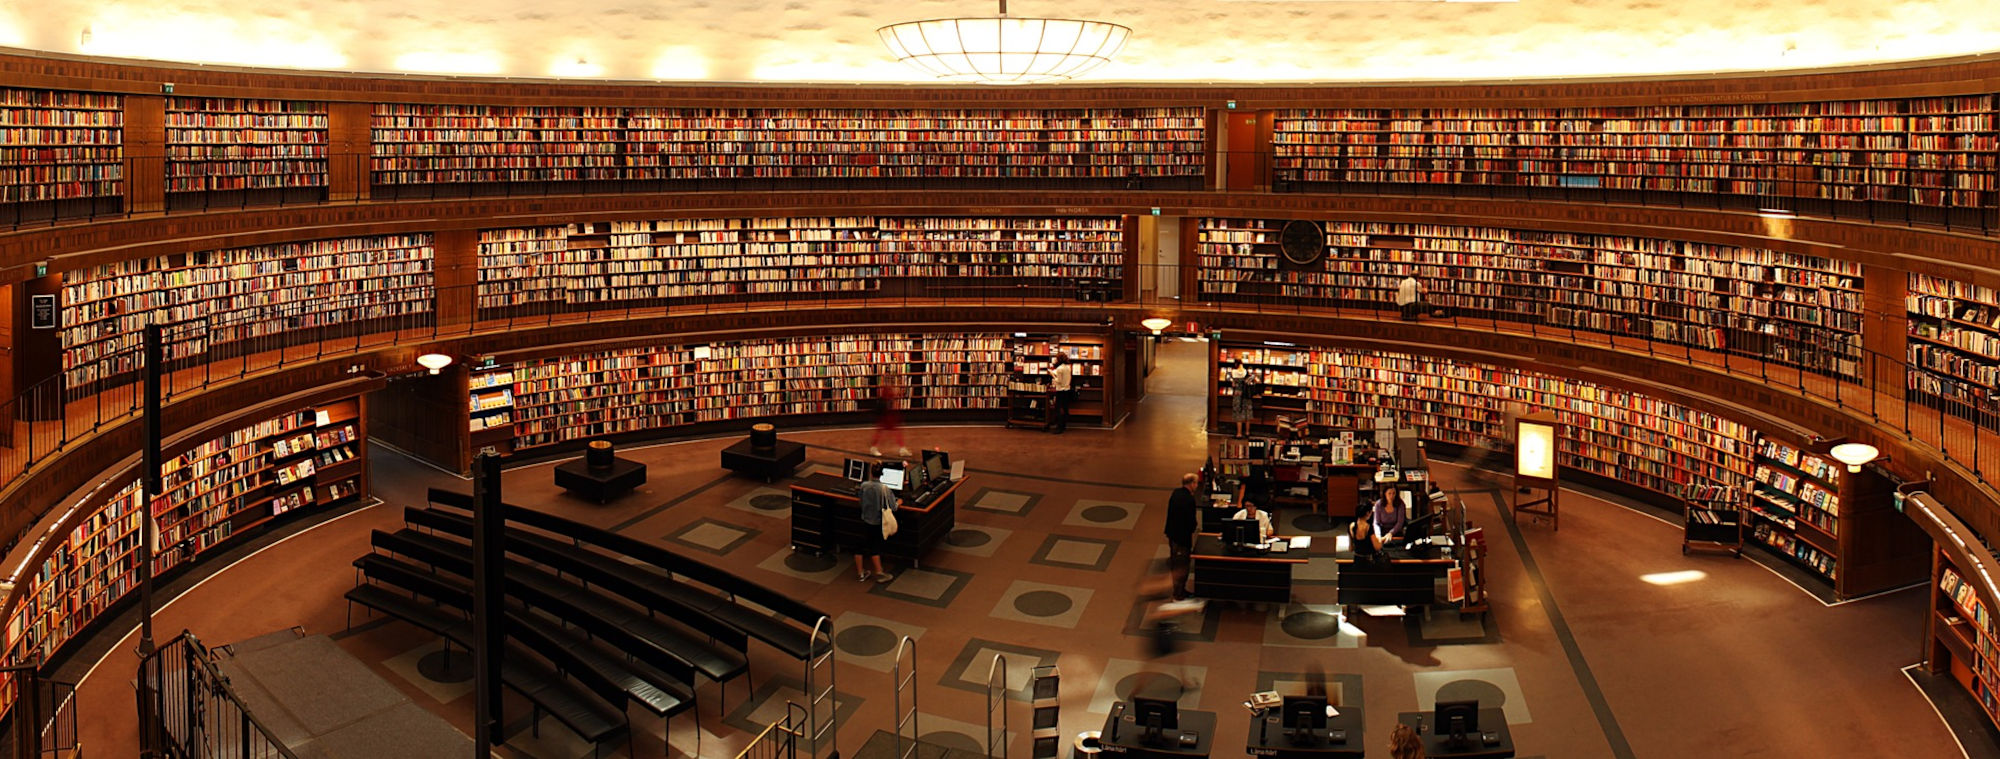 A large circular library full of book shelves and books